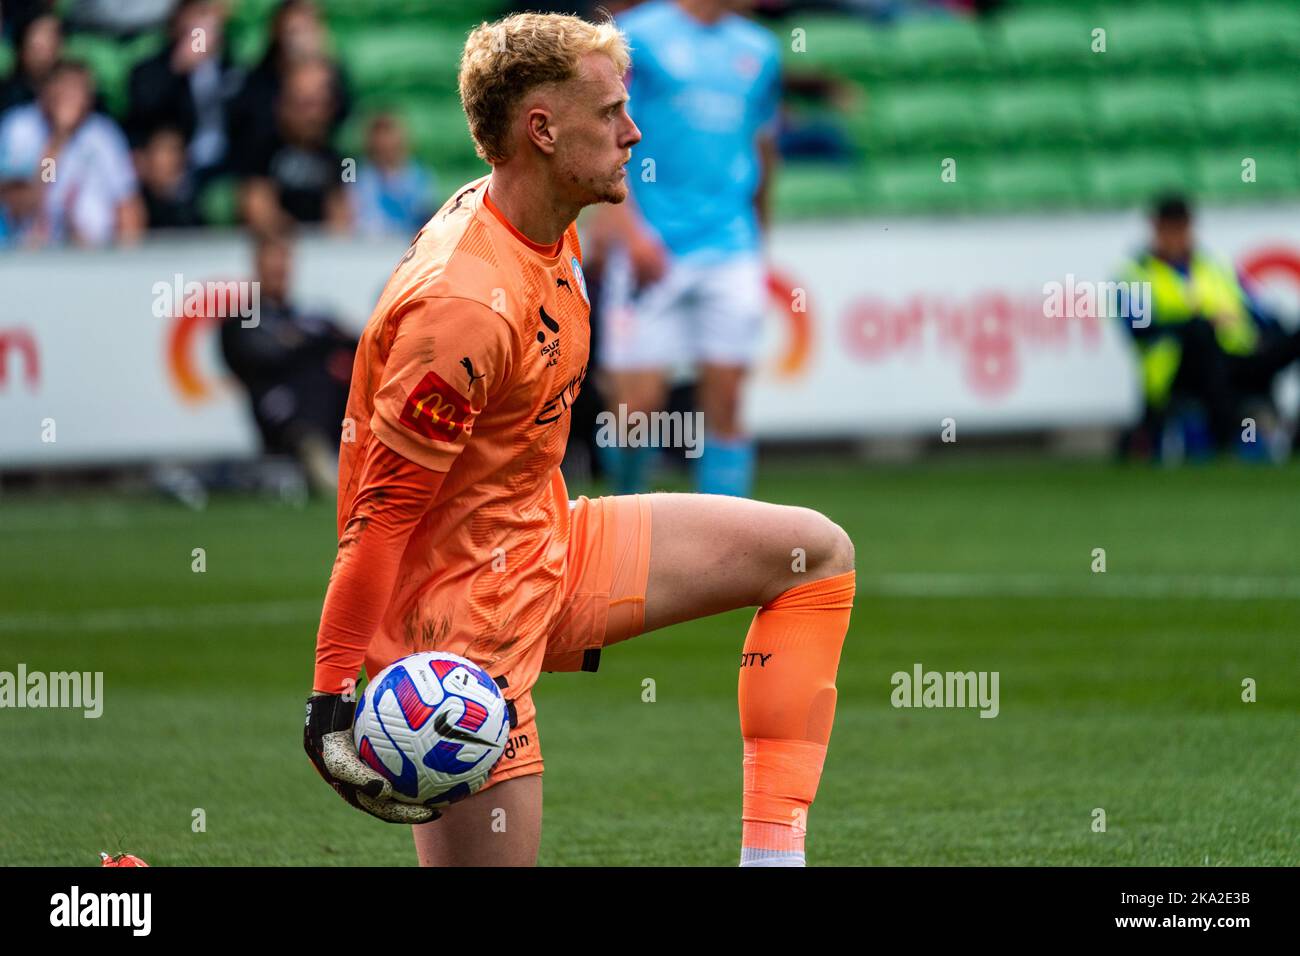 Melbourne, Australia. 30,October, 2022. Melbourne City Goalkeeper Thomas Glover #1 recovers after performing a save during Round 4 Melbourne City vs. Wellington Phoenix game at AAMI Park Credit: James Forrester/Alamy Live News. Stock Photo